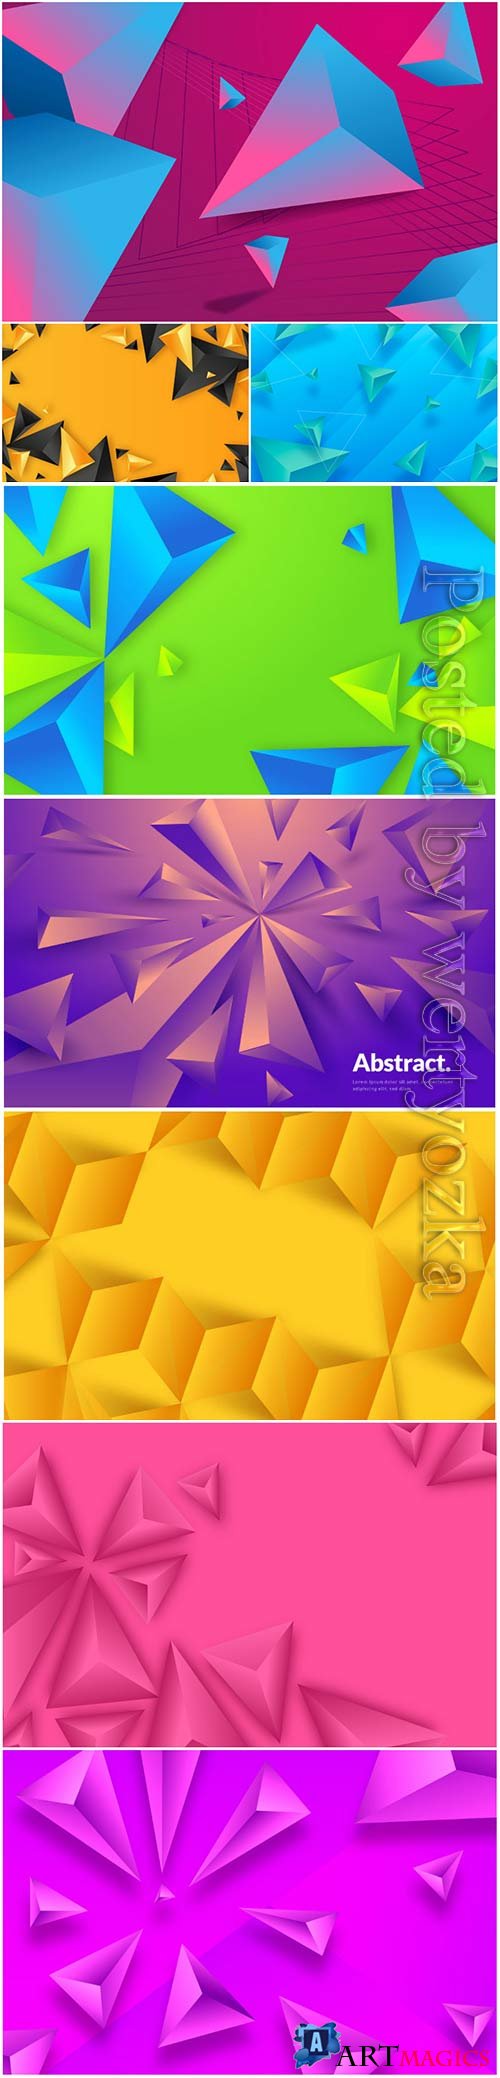 Abstract vector background, 3d models template